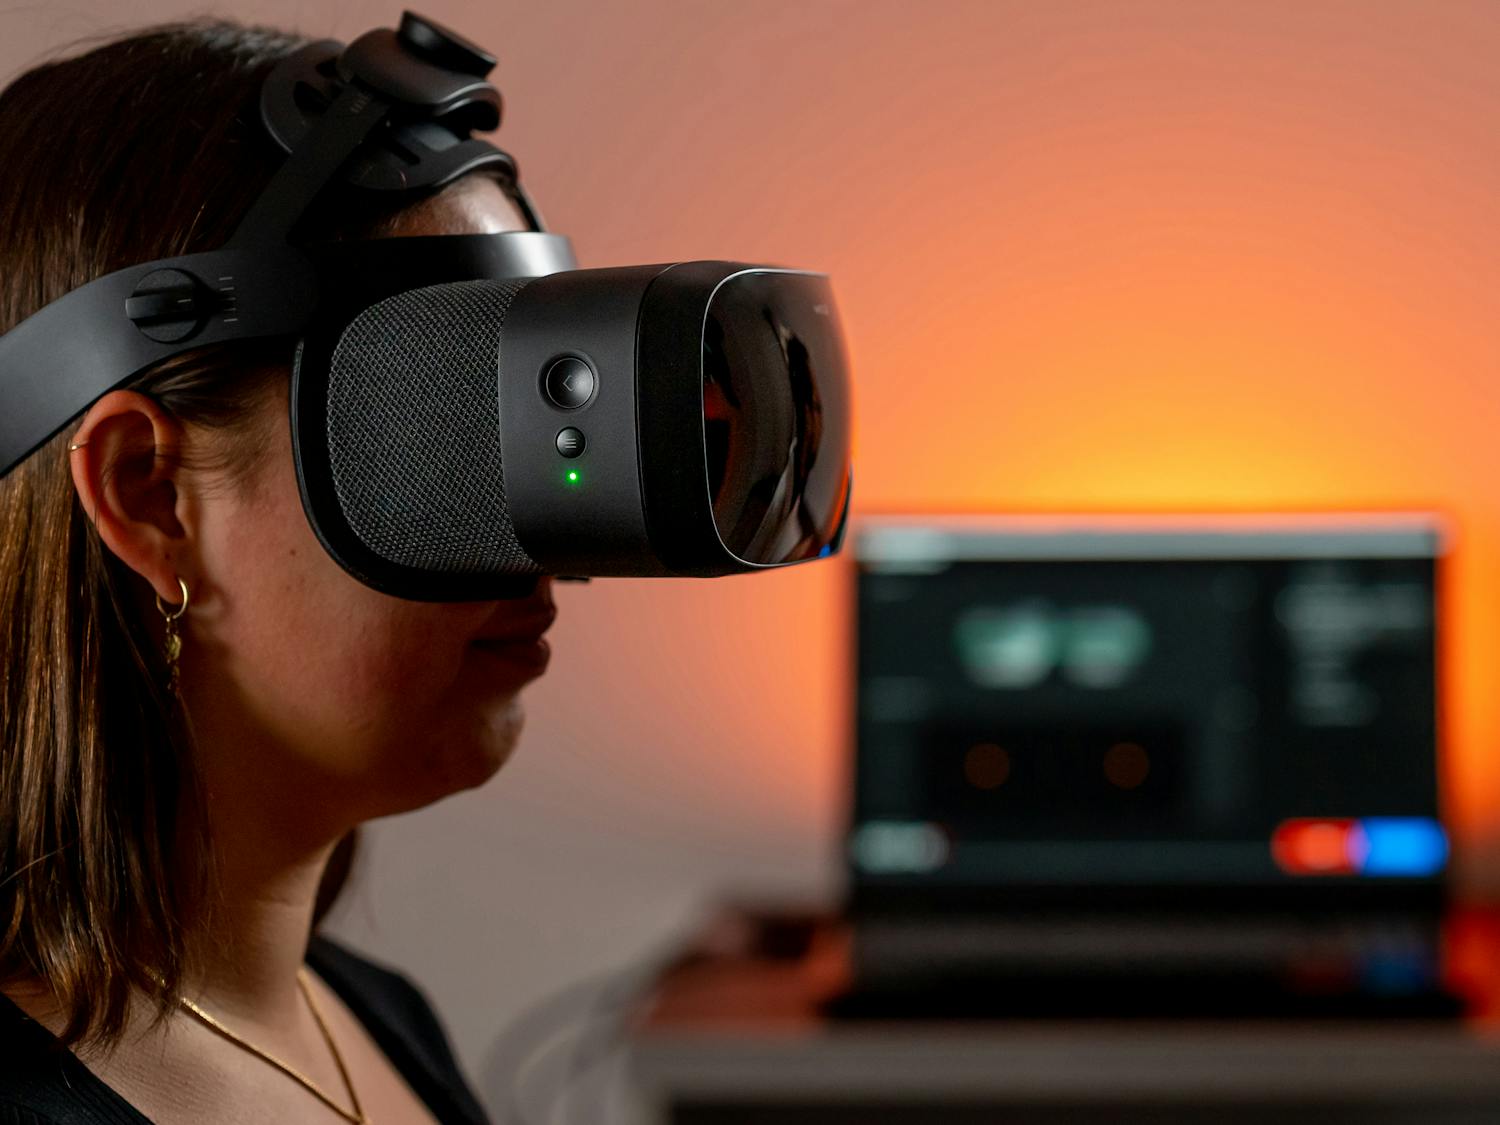 machineMD's new device, neos®, detects brain disorders using VR